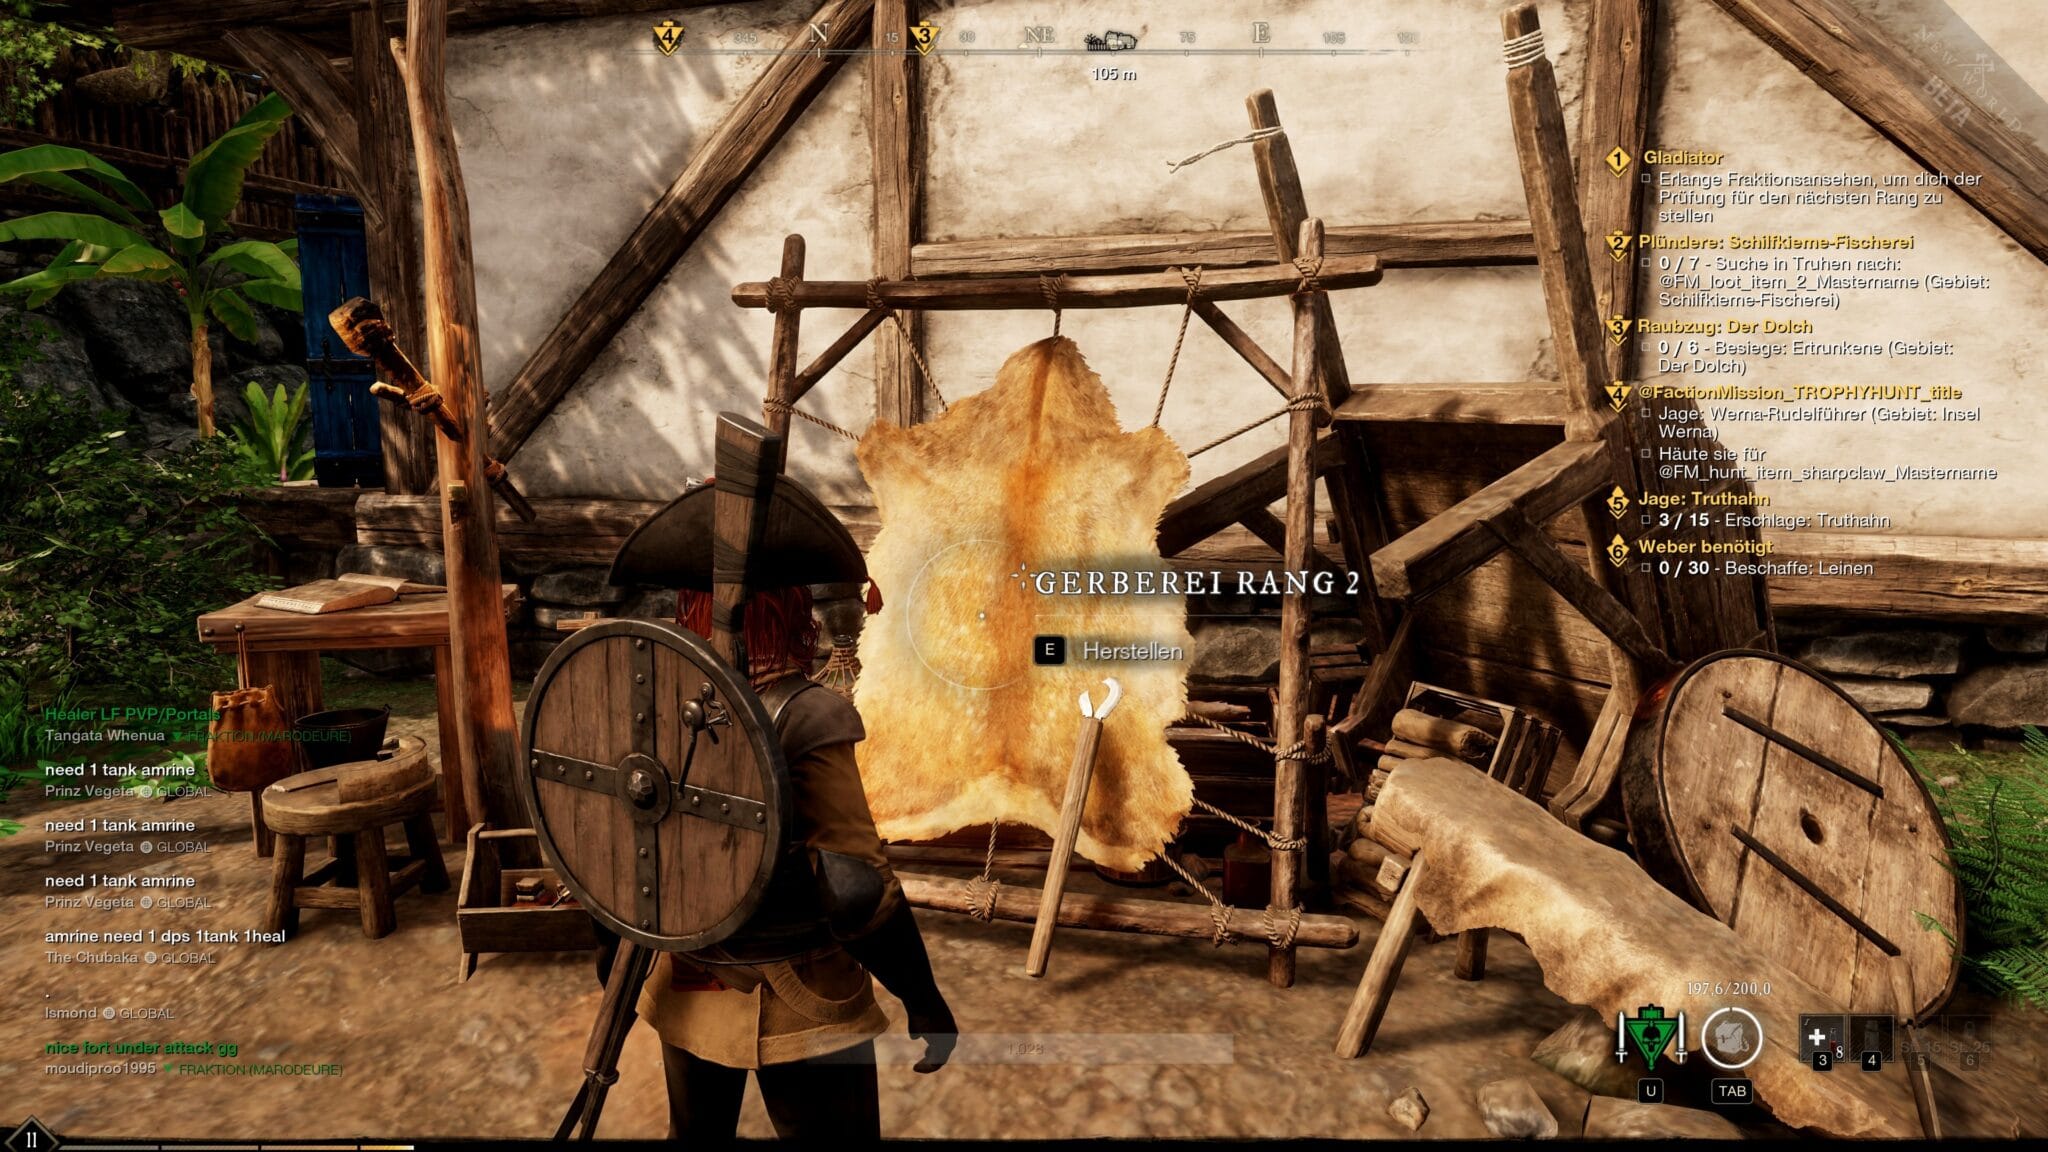 You can find such crafting stations in settlements.